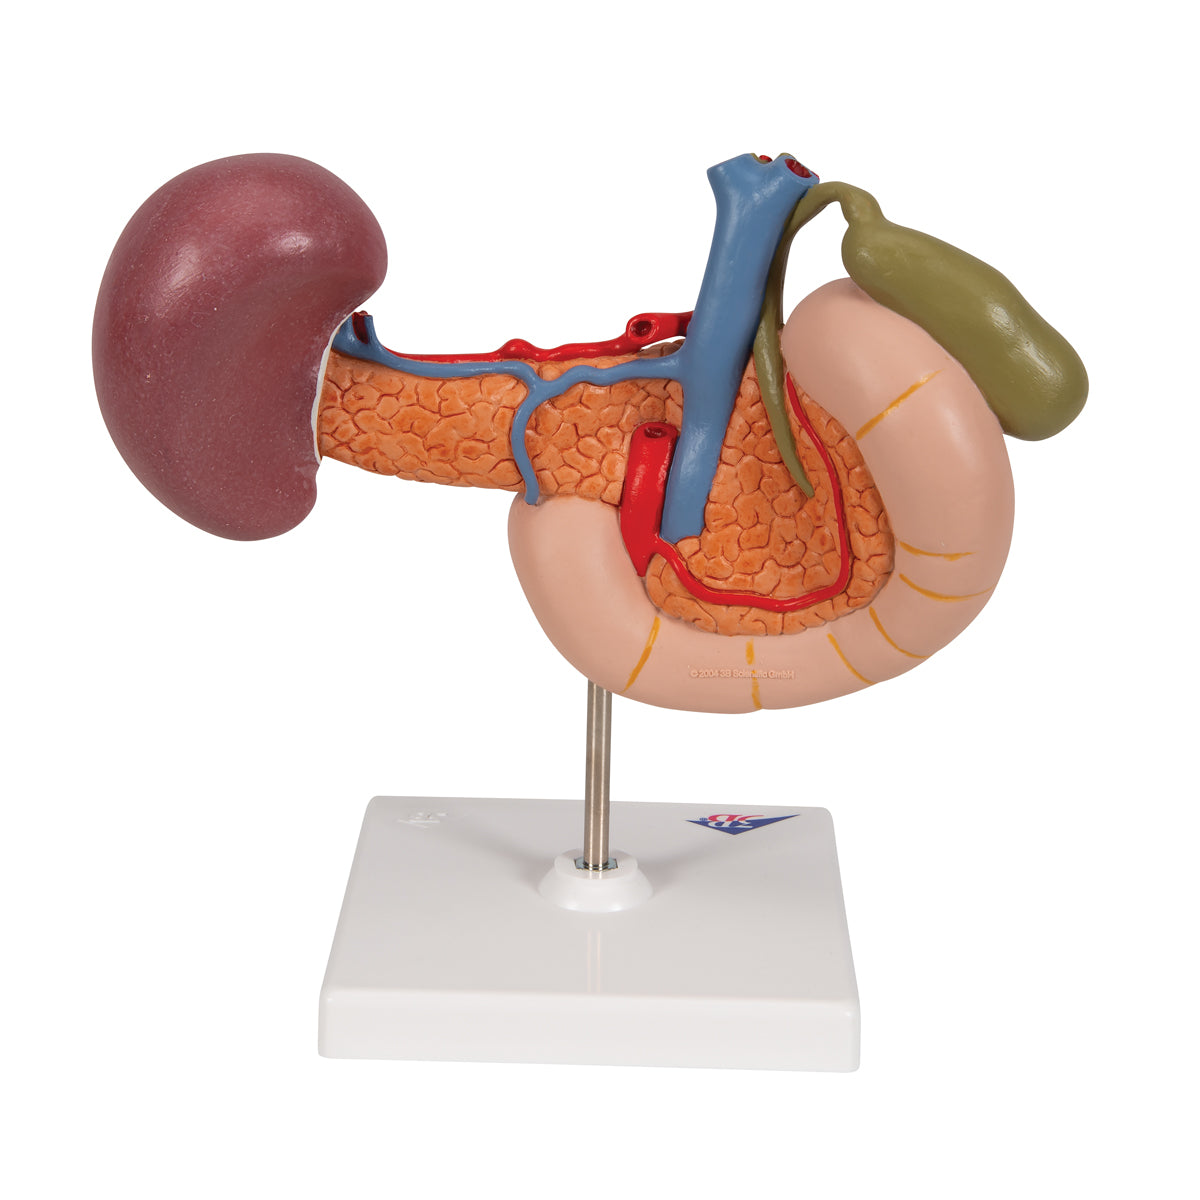 Model of the duodenum and the relationship of the pancreas to other organs